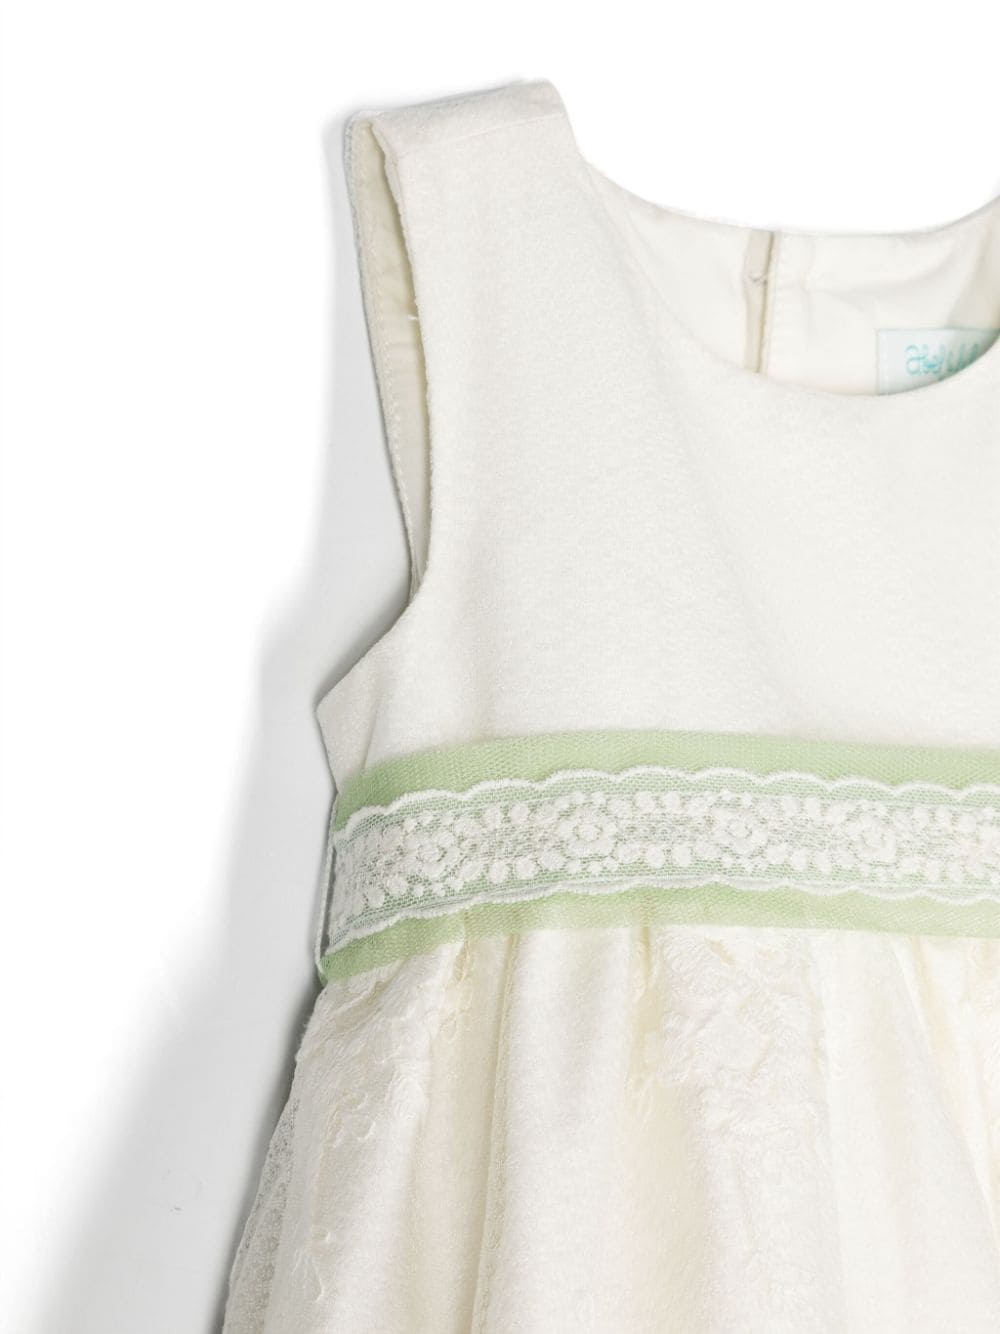 White dress for baby girls with tulle